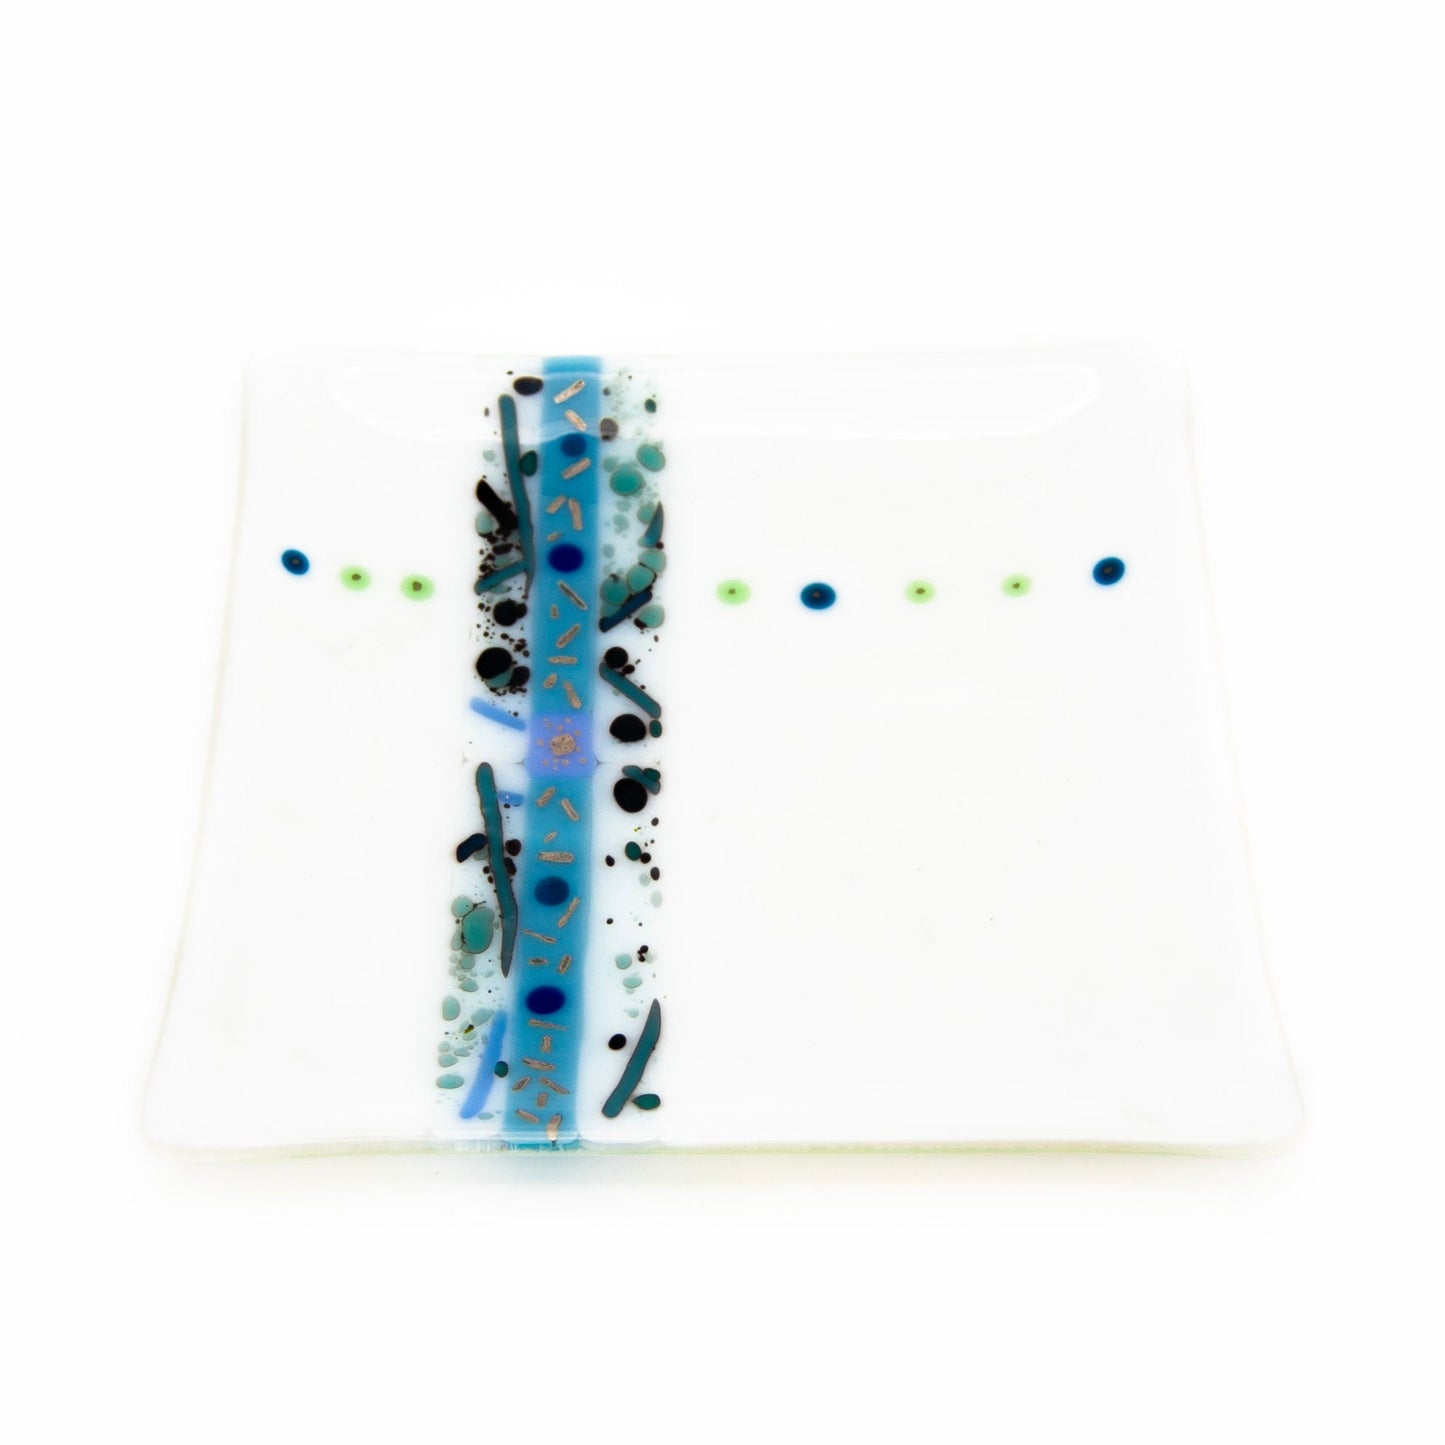 8" Square Platter with Blue Speckled Dust